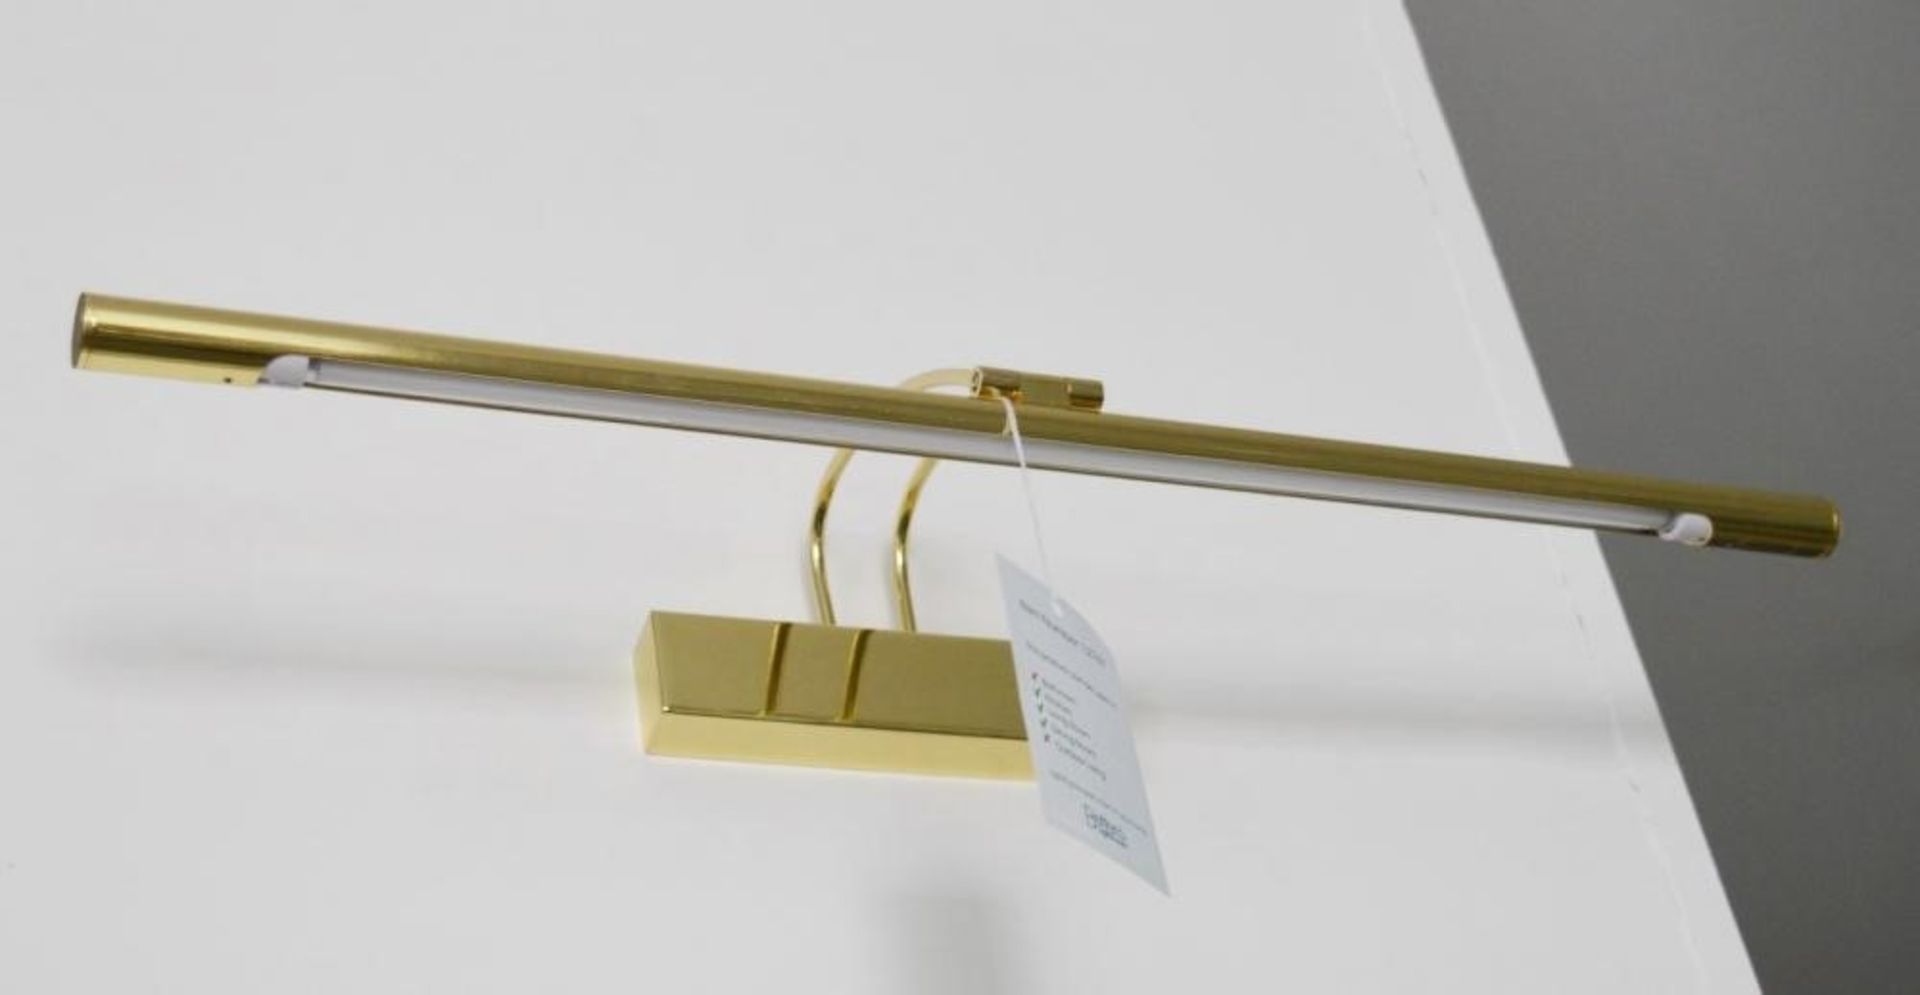 1 x Polished Brass Picture Light With Adjustable Head, Switched - Ex Display Stock - CL298 - Ref: J1 - Image 3 of 3